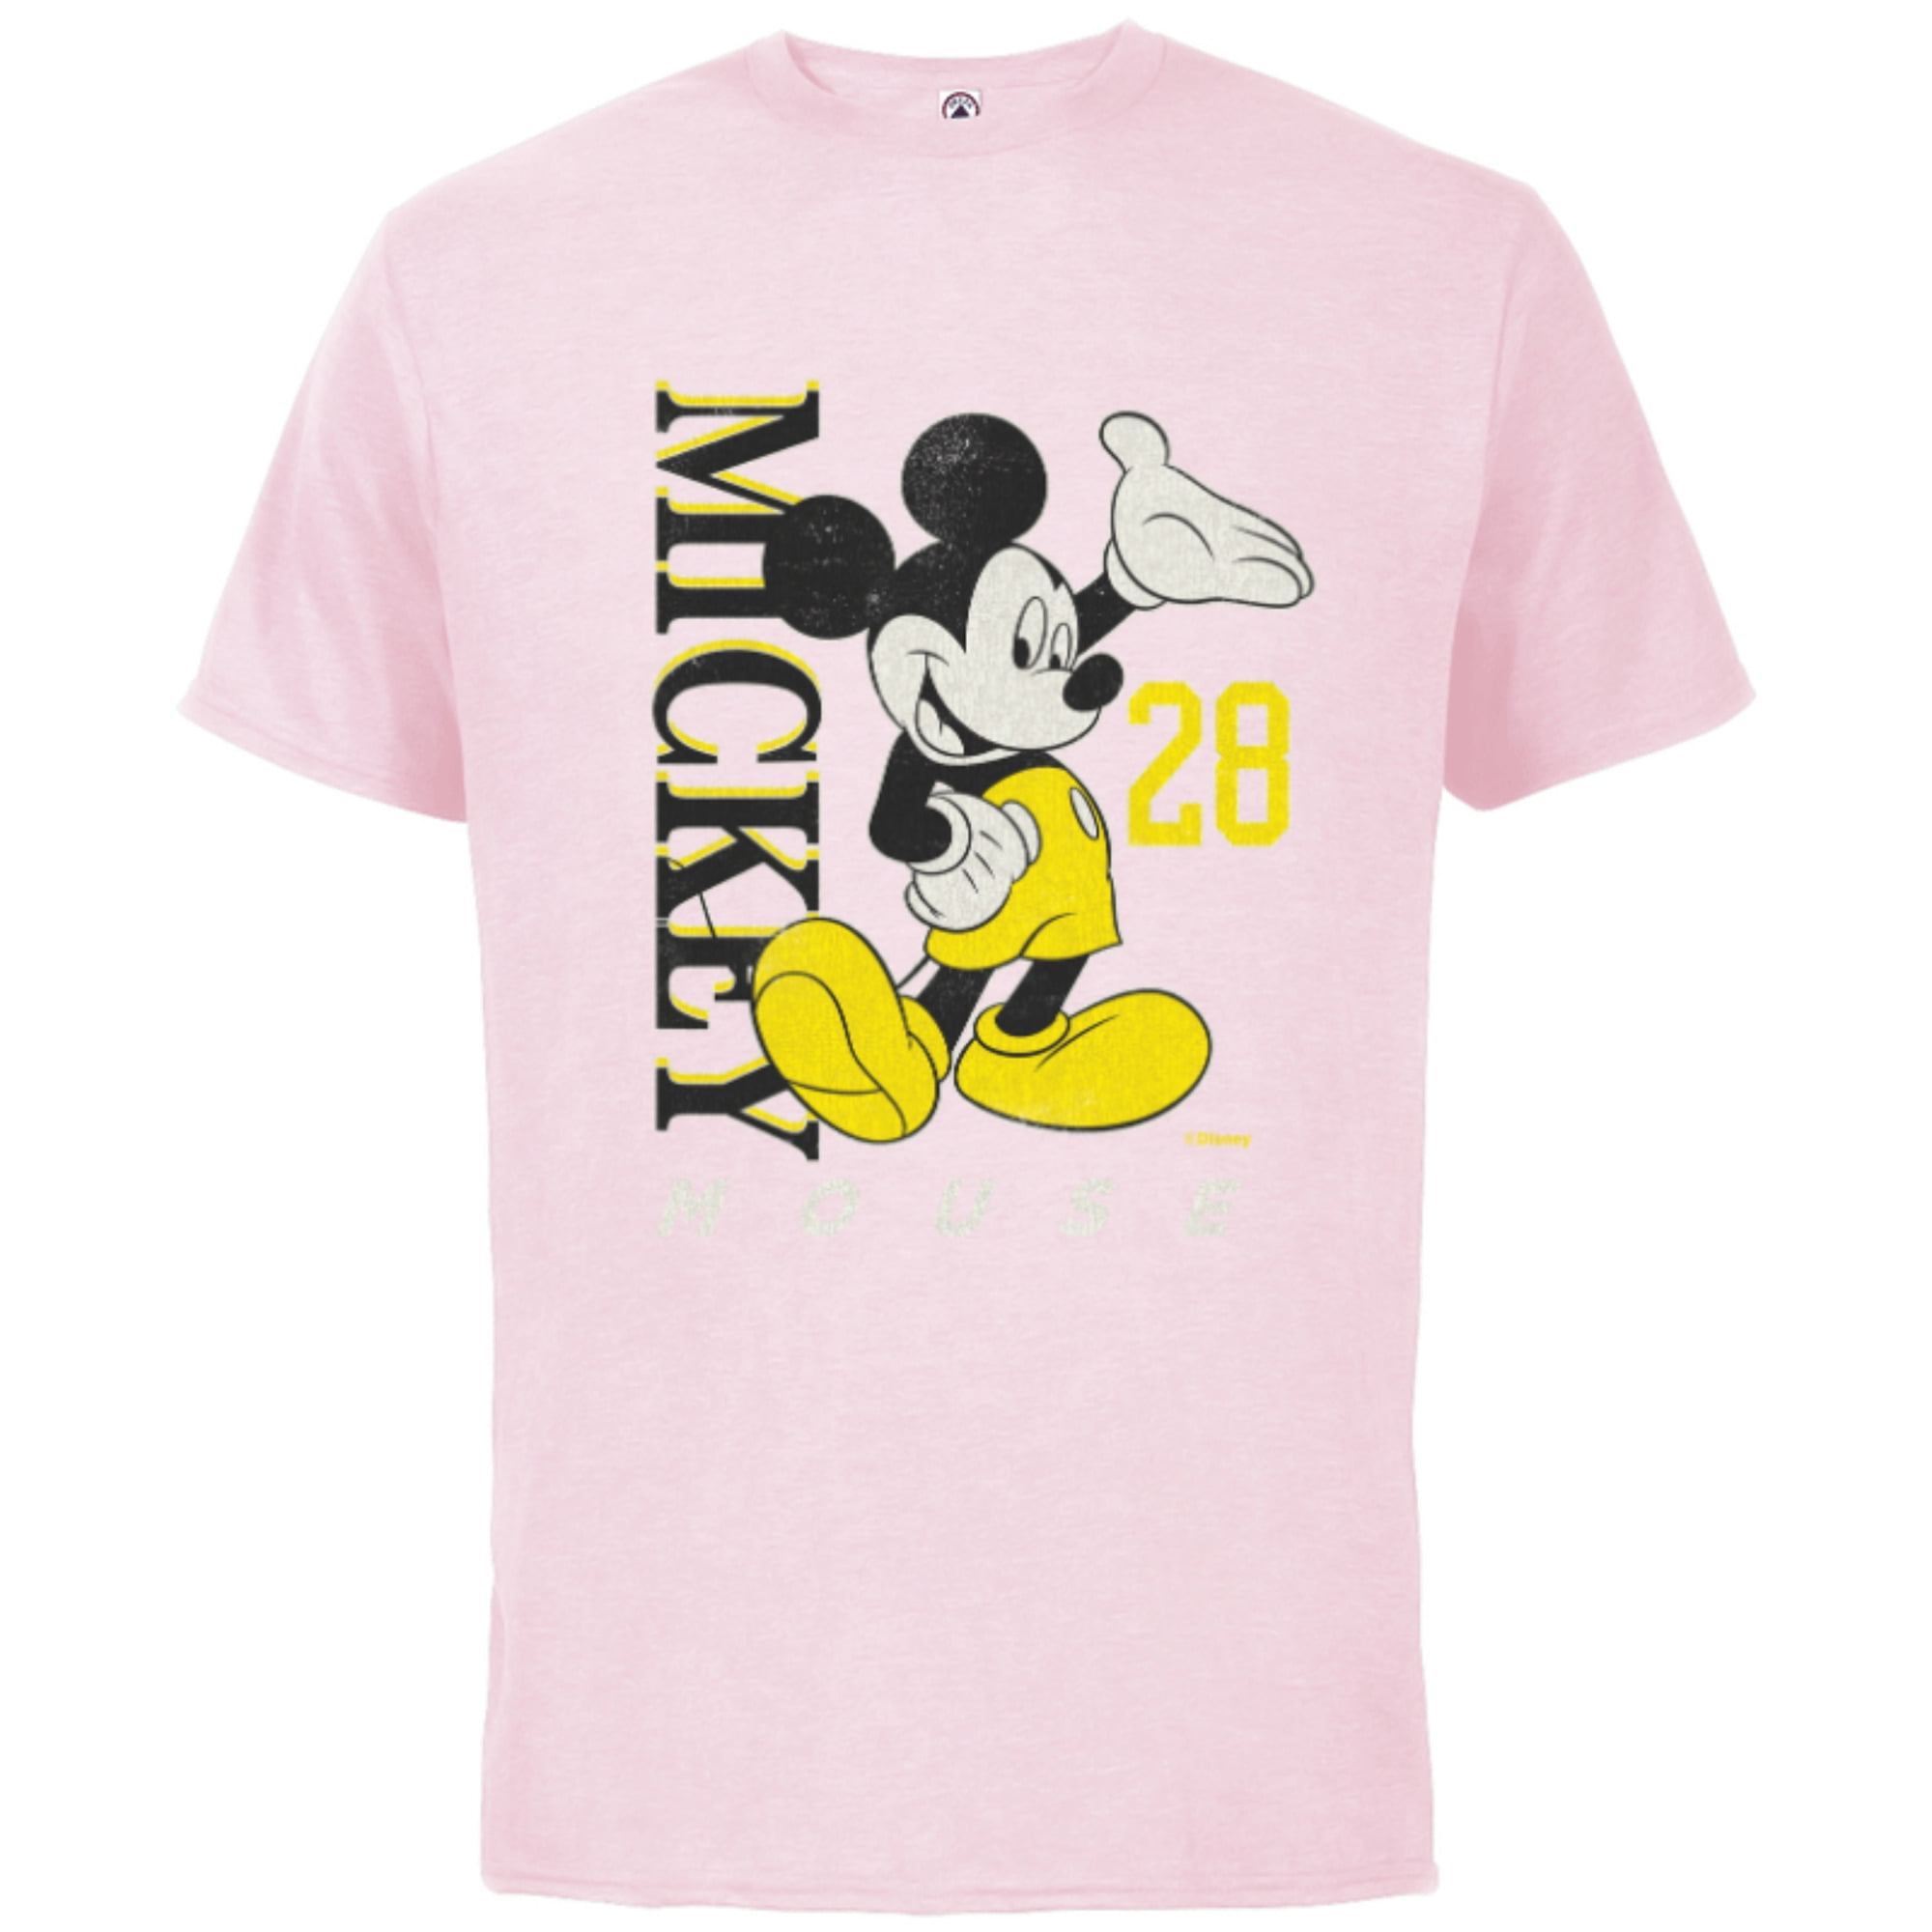 Beliebte Produkte Disney Mickey Mouse Vintage Classics - & T-Shirt Sleeve Yellow 28 for Short Adults Customized-Black - Black Cotton